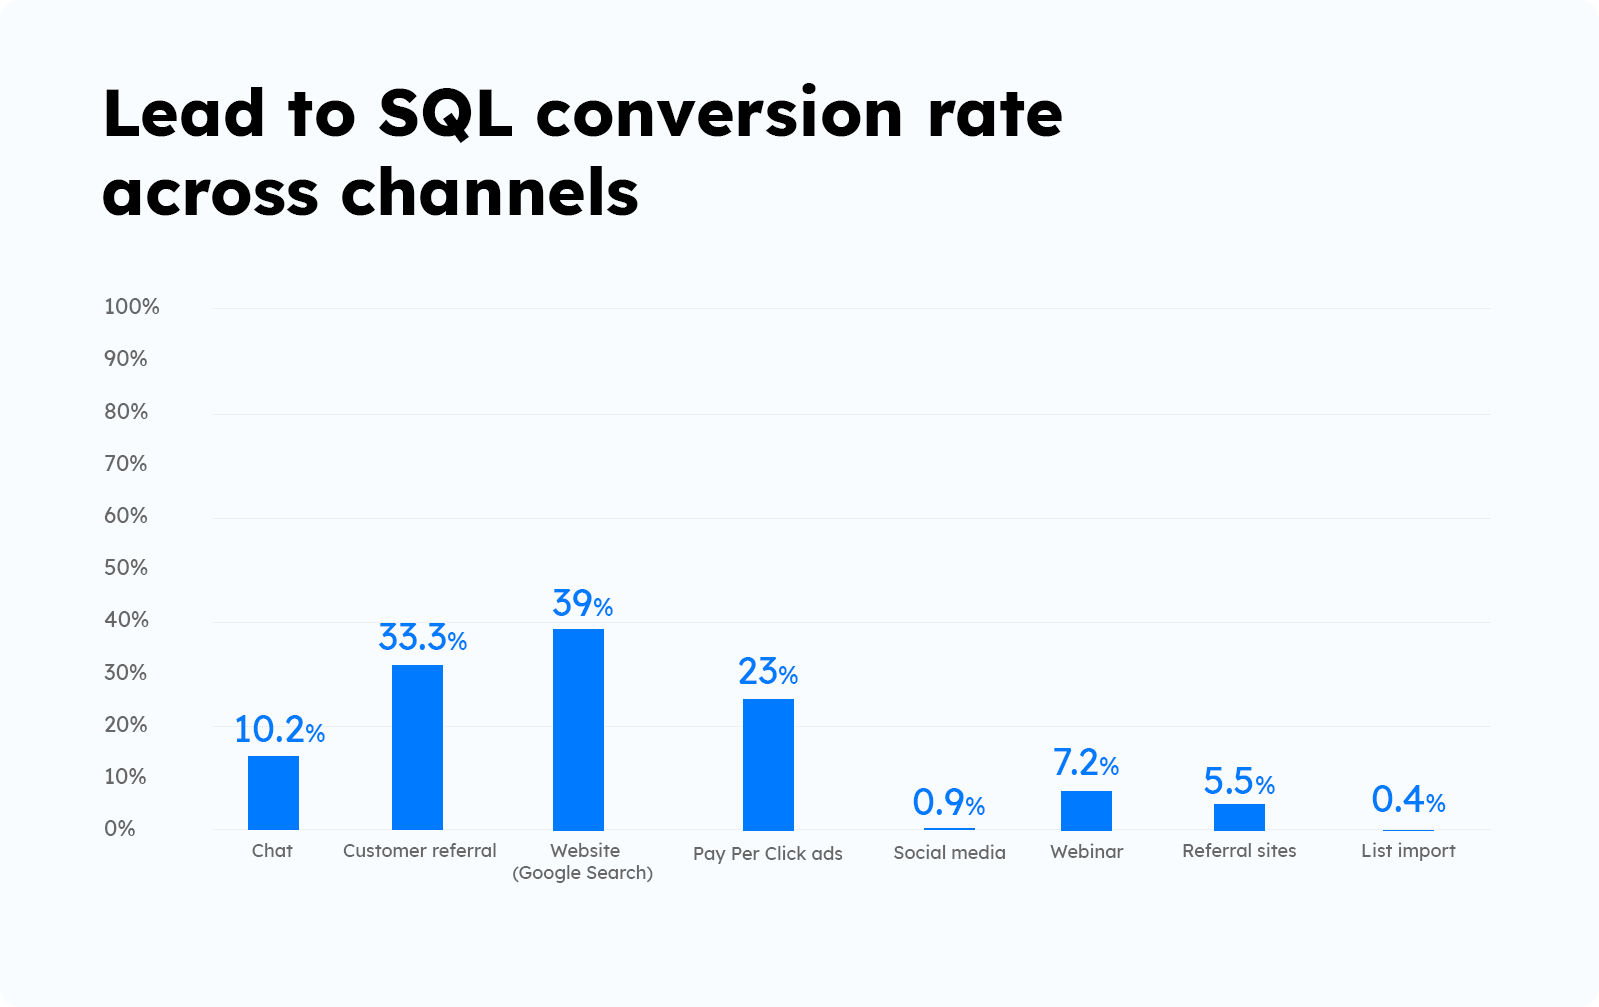 lead-to-SQL-conversion-rates-across-channels